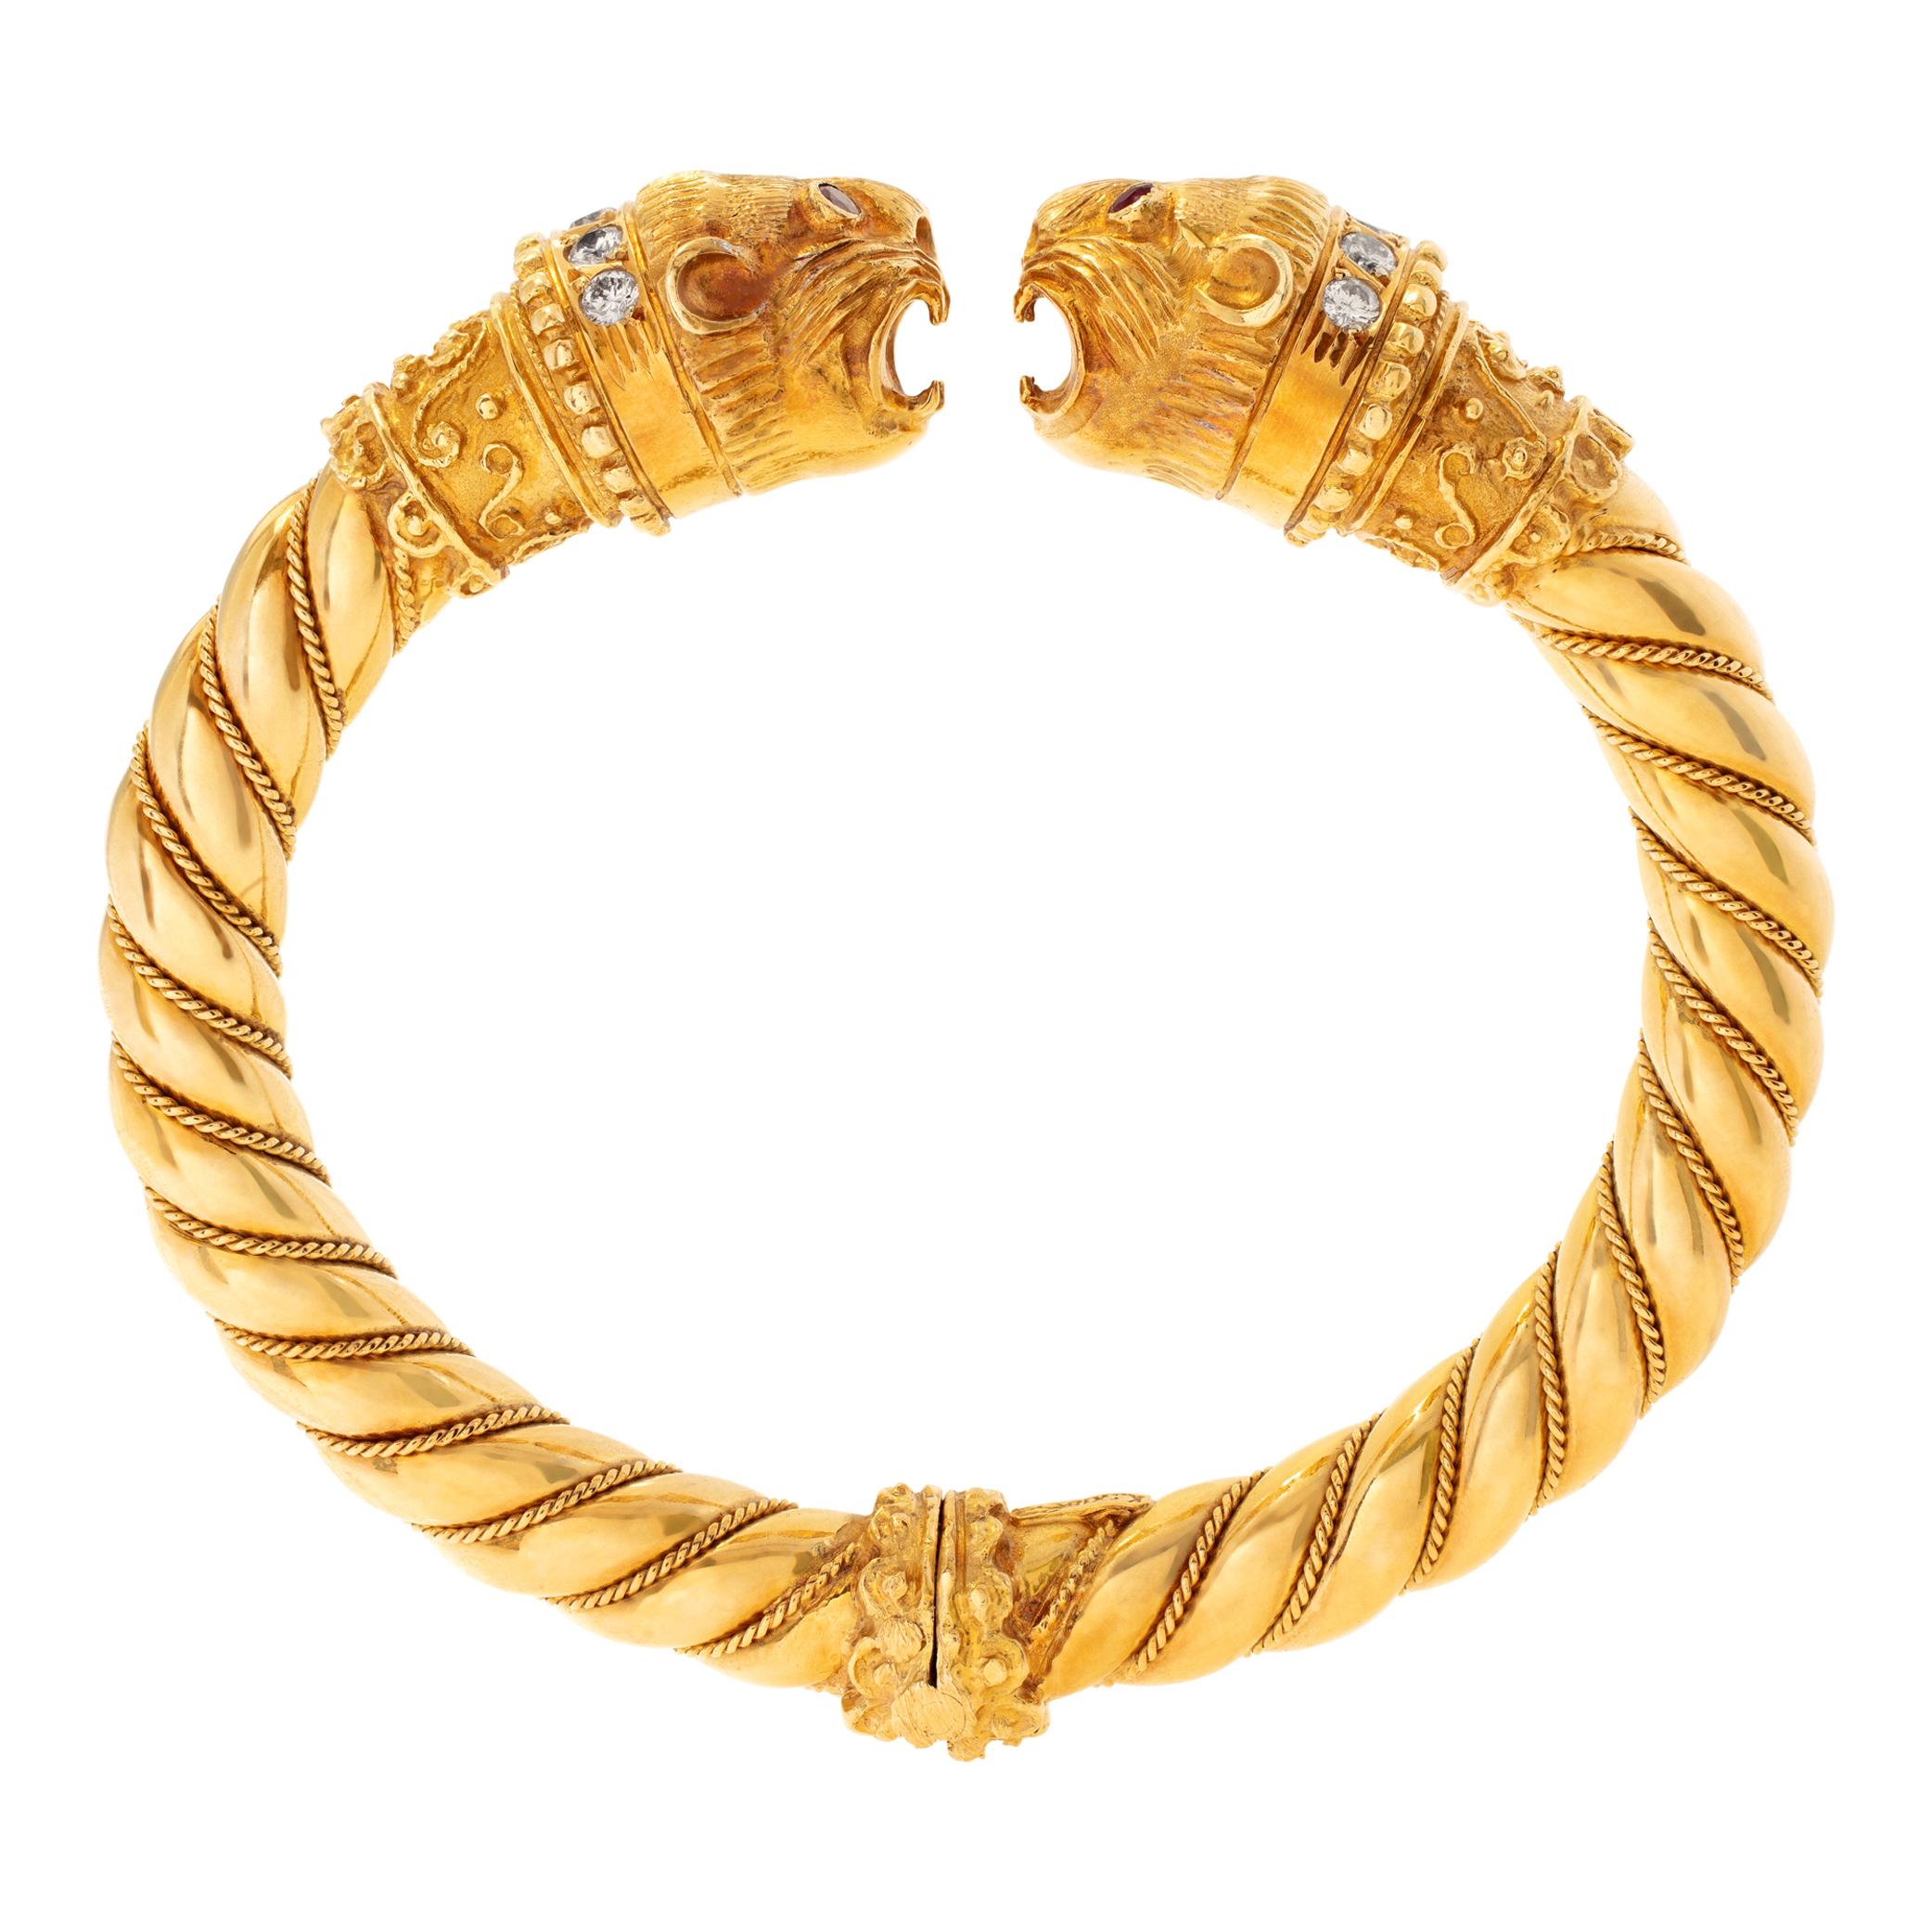 Vintage Greek designer Ilias Lalaouinis for Zolotas, original double Chimera heads design bangle bracelet in 18K yellow gold. Chimera heads have approx 1.00 carat round brilliant cut diamonds collar and pair of brilliant cut rubies eyes each. Bangle